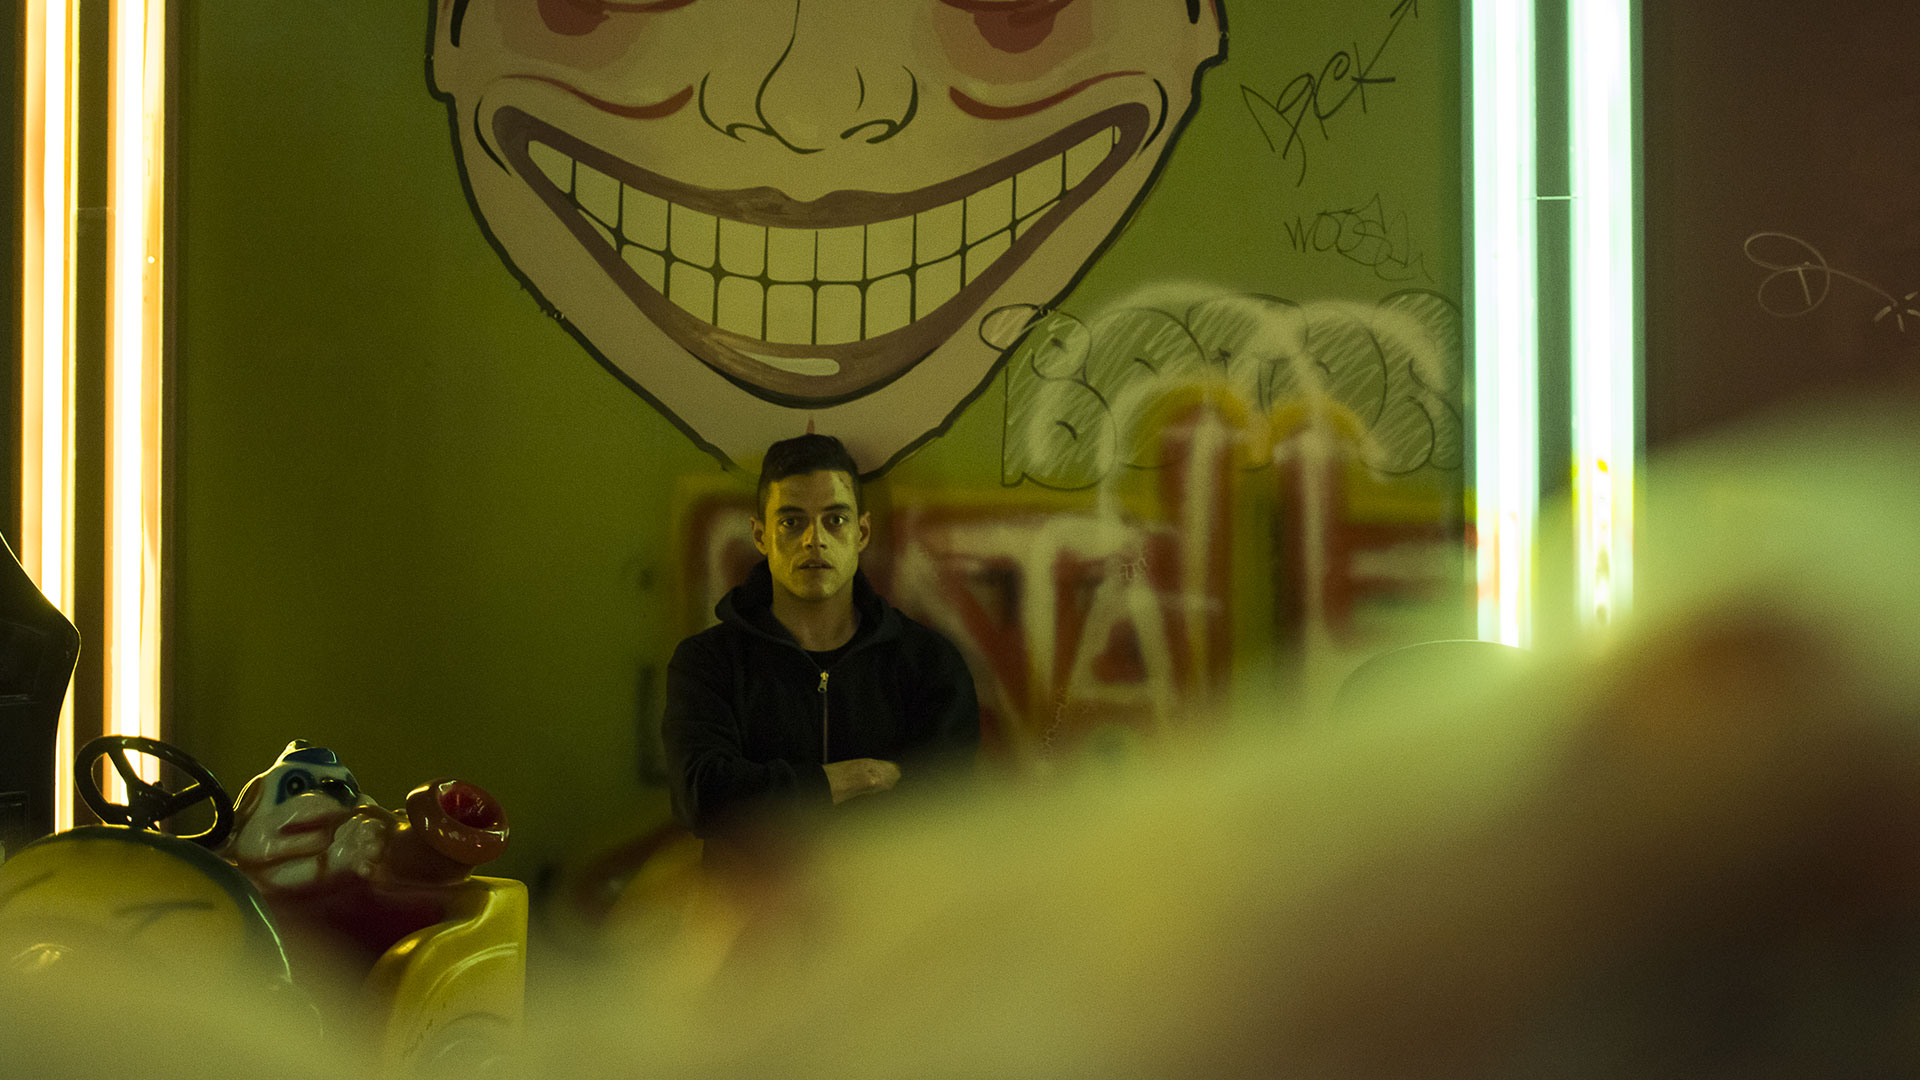 How the Real Hackers Behind Mr. Robot Get It So Right